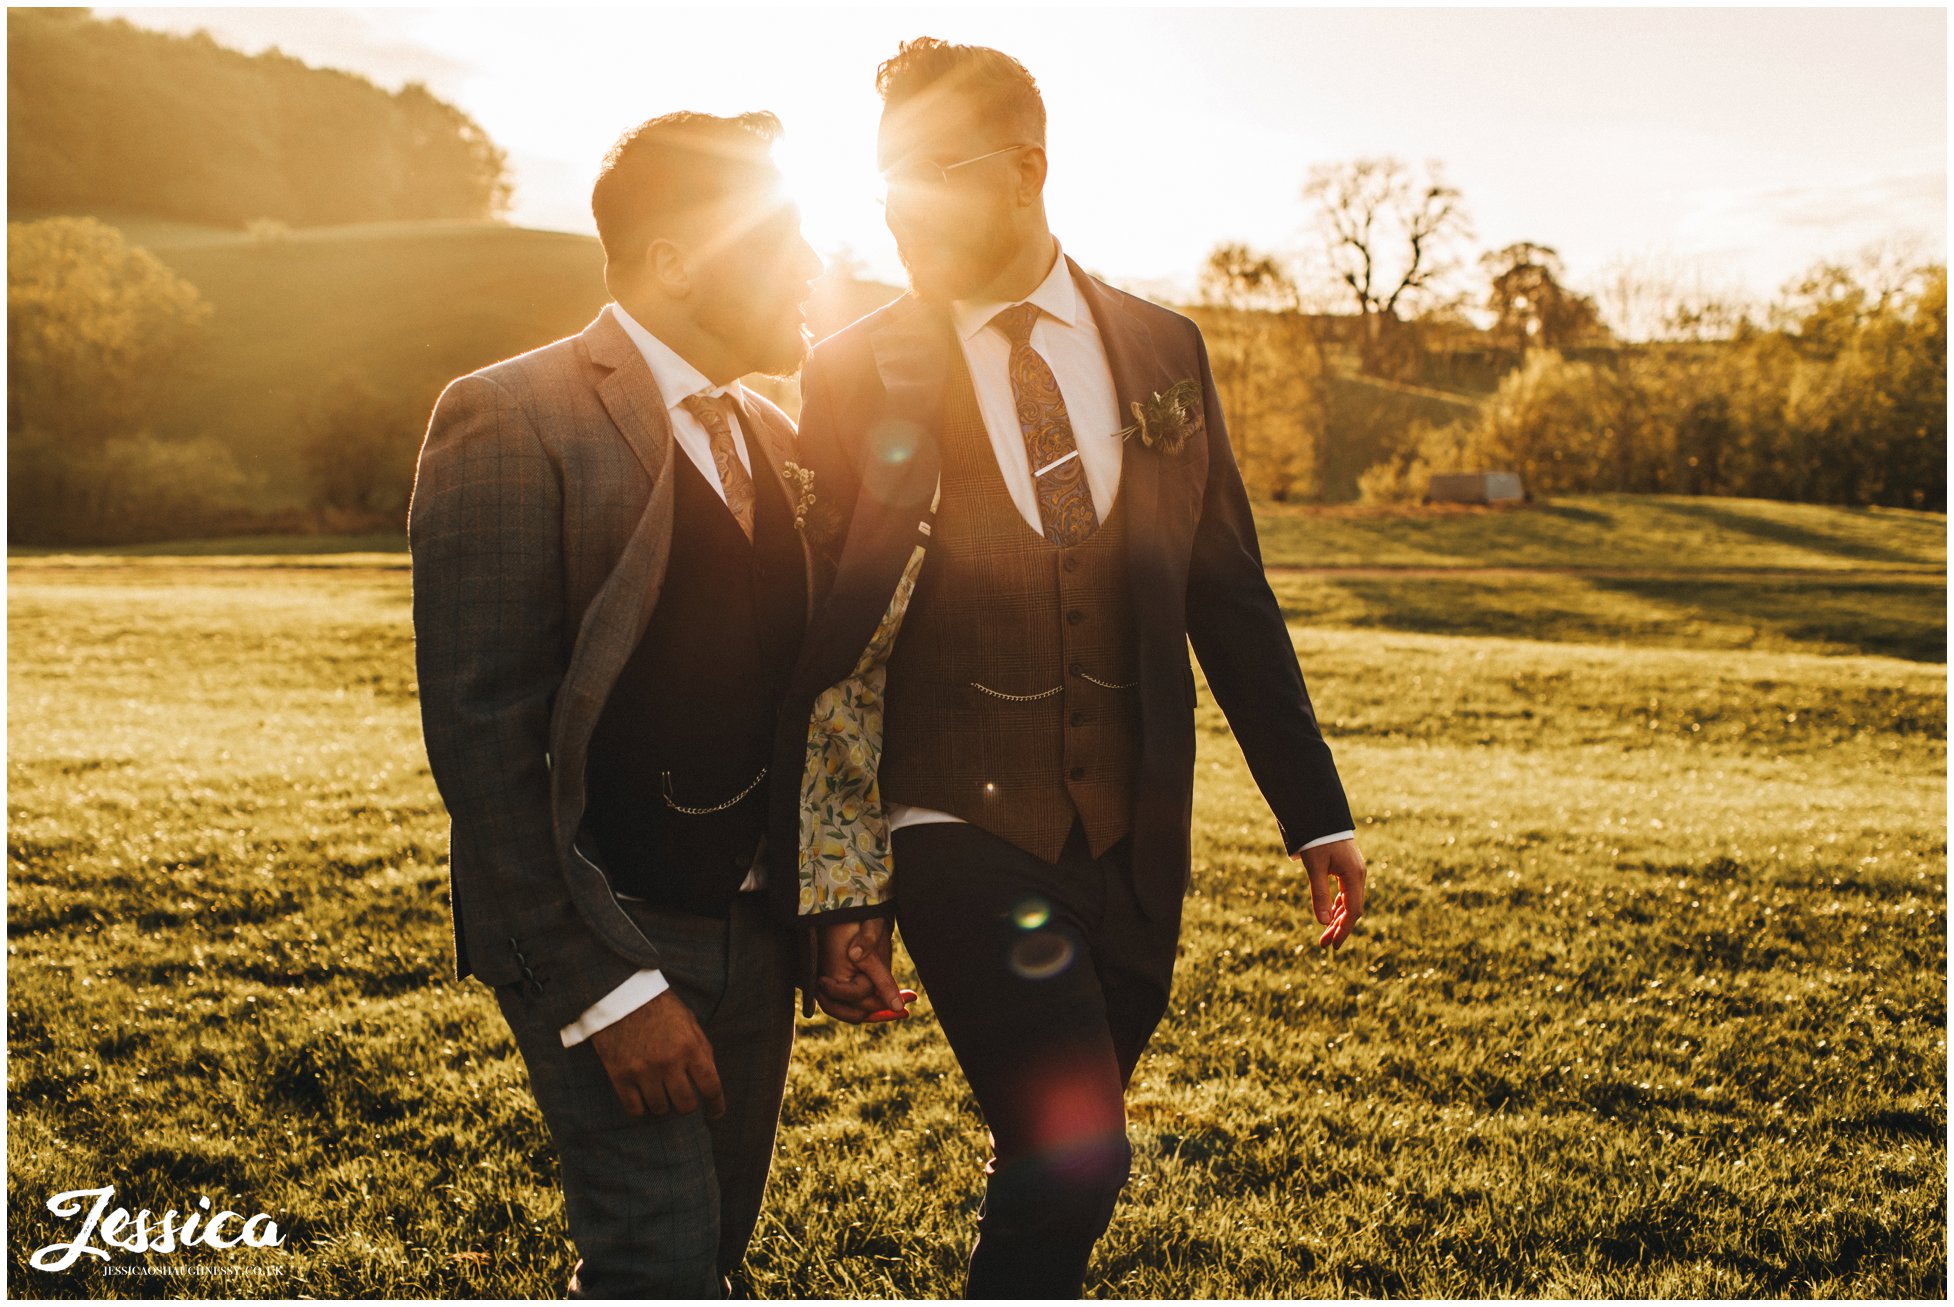 Groom's walk through the field together in the evening